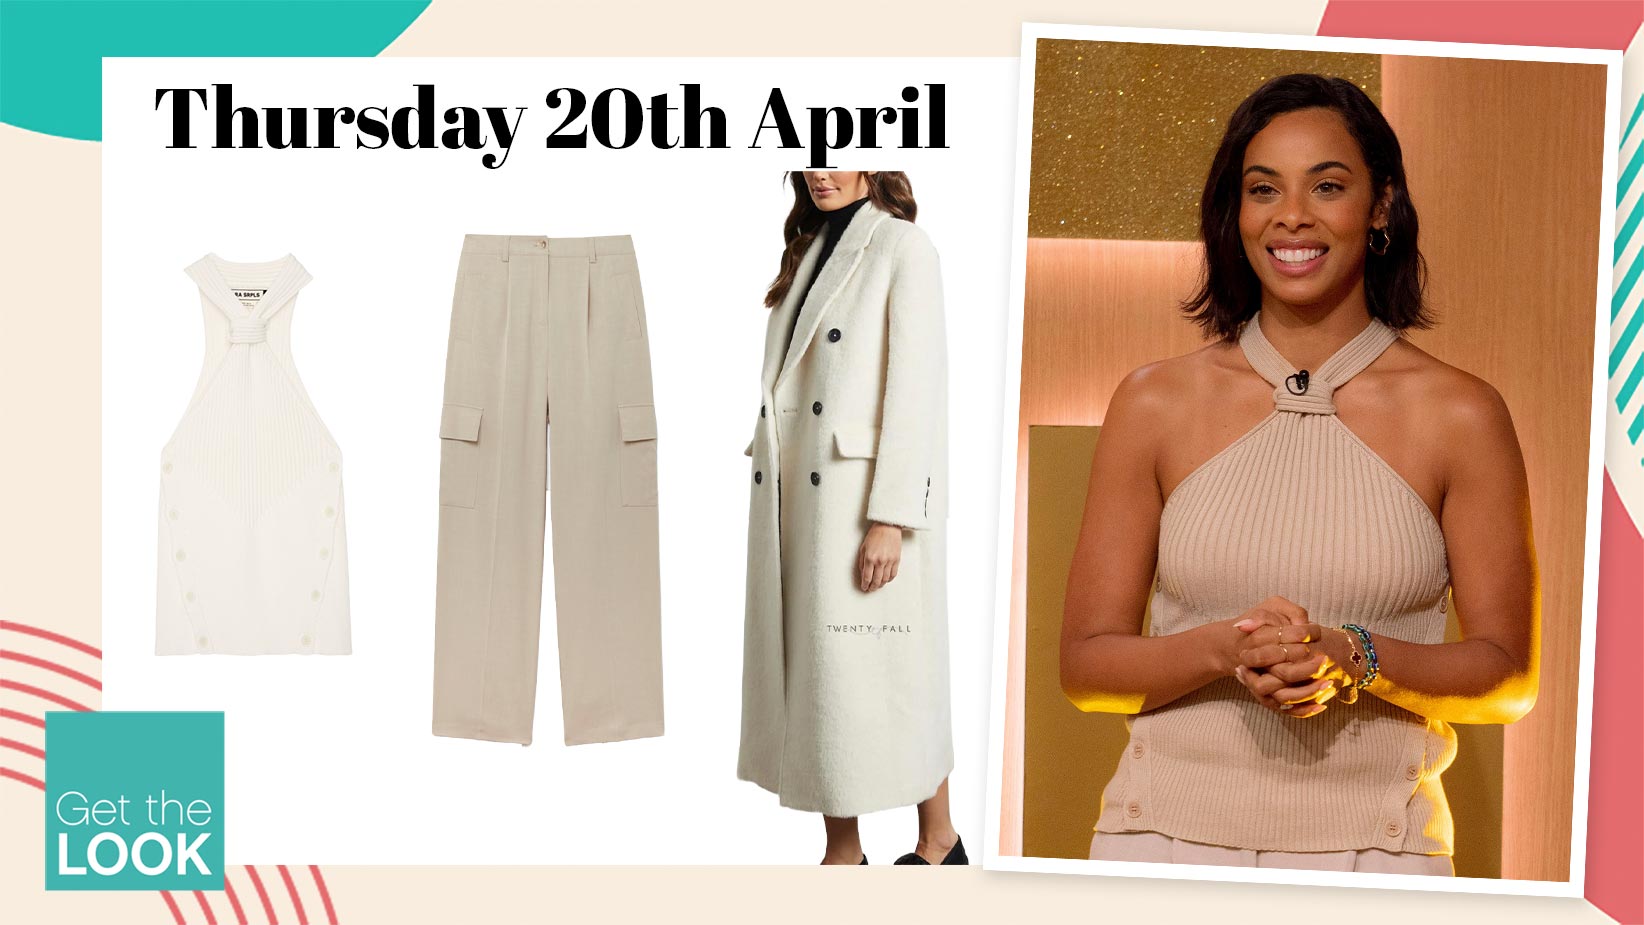 Shop Rochelle Humes' look!